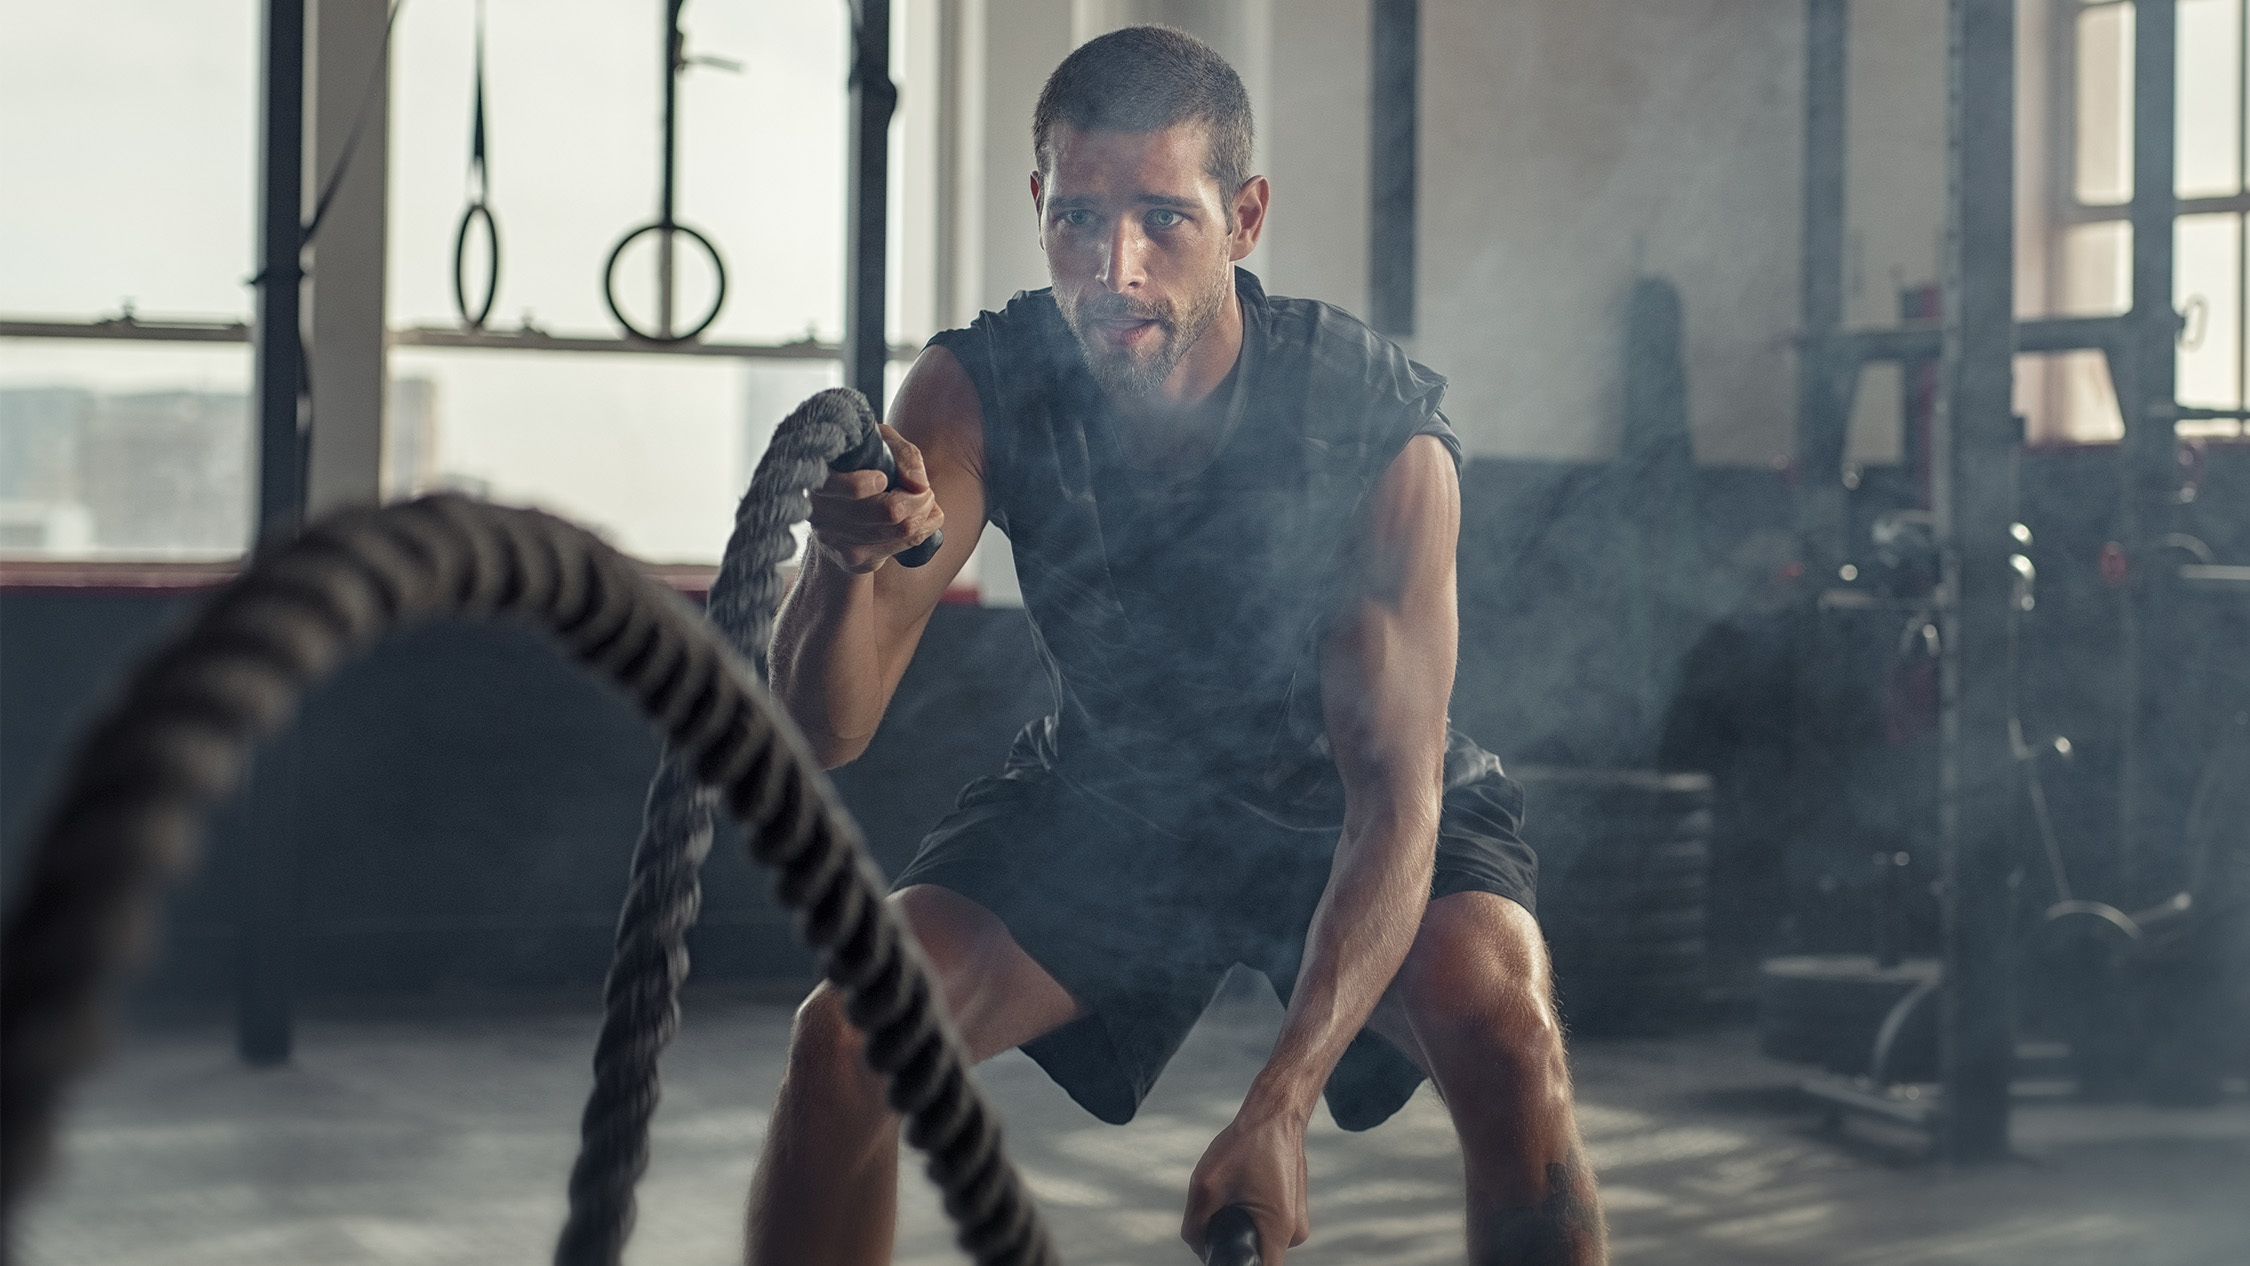 Upgrade your battle ropes workout with the grappler throw